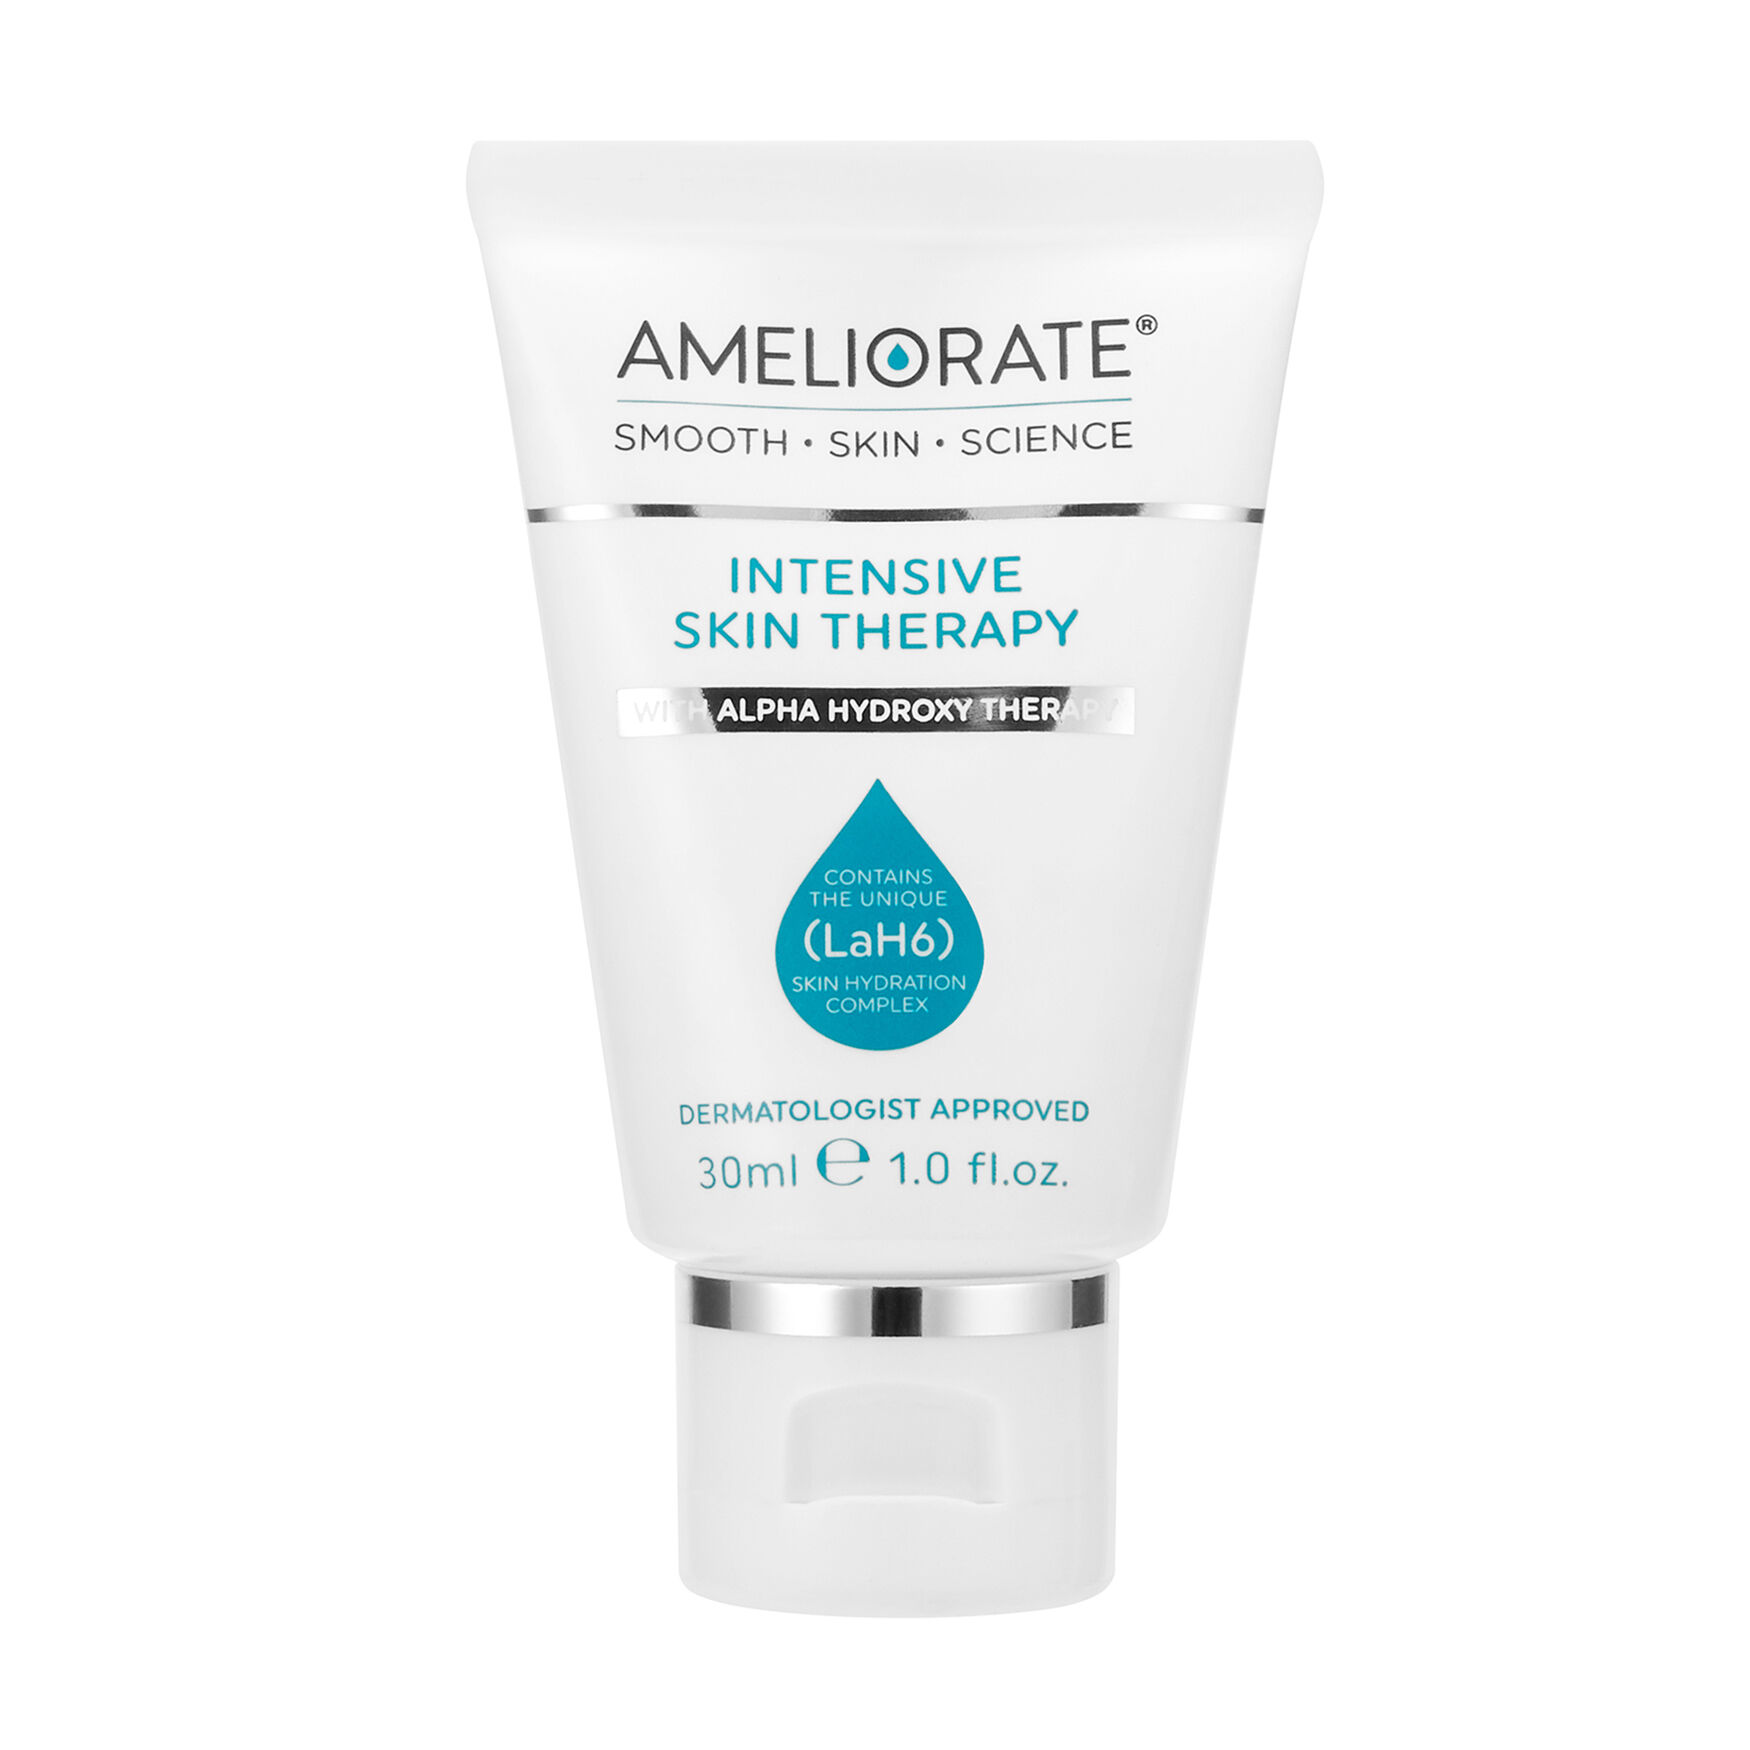 AMELIORATE INTENSIVE SKIN THERAPY